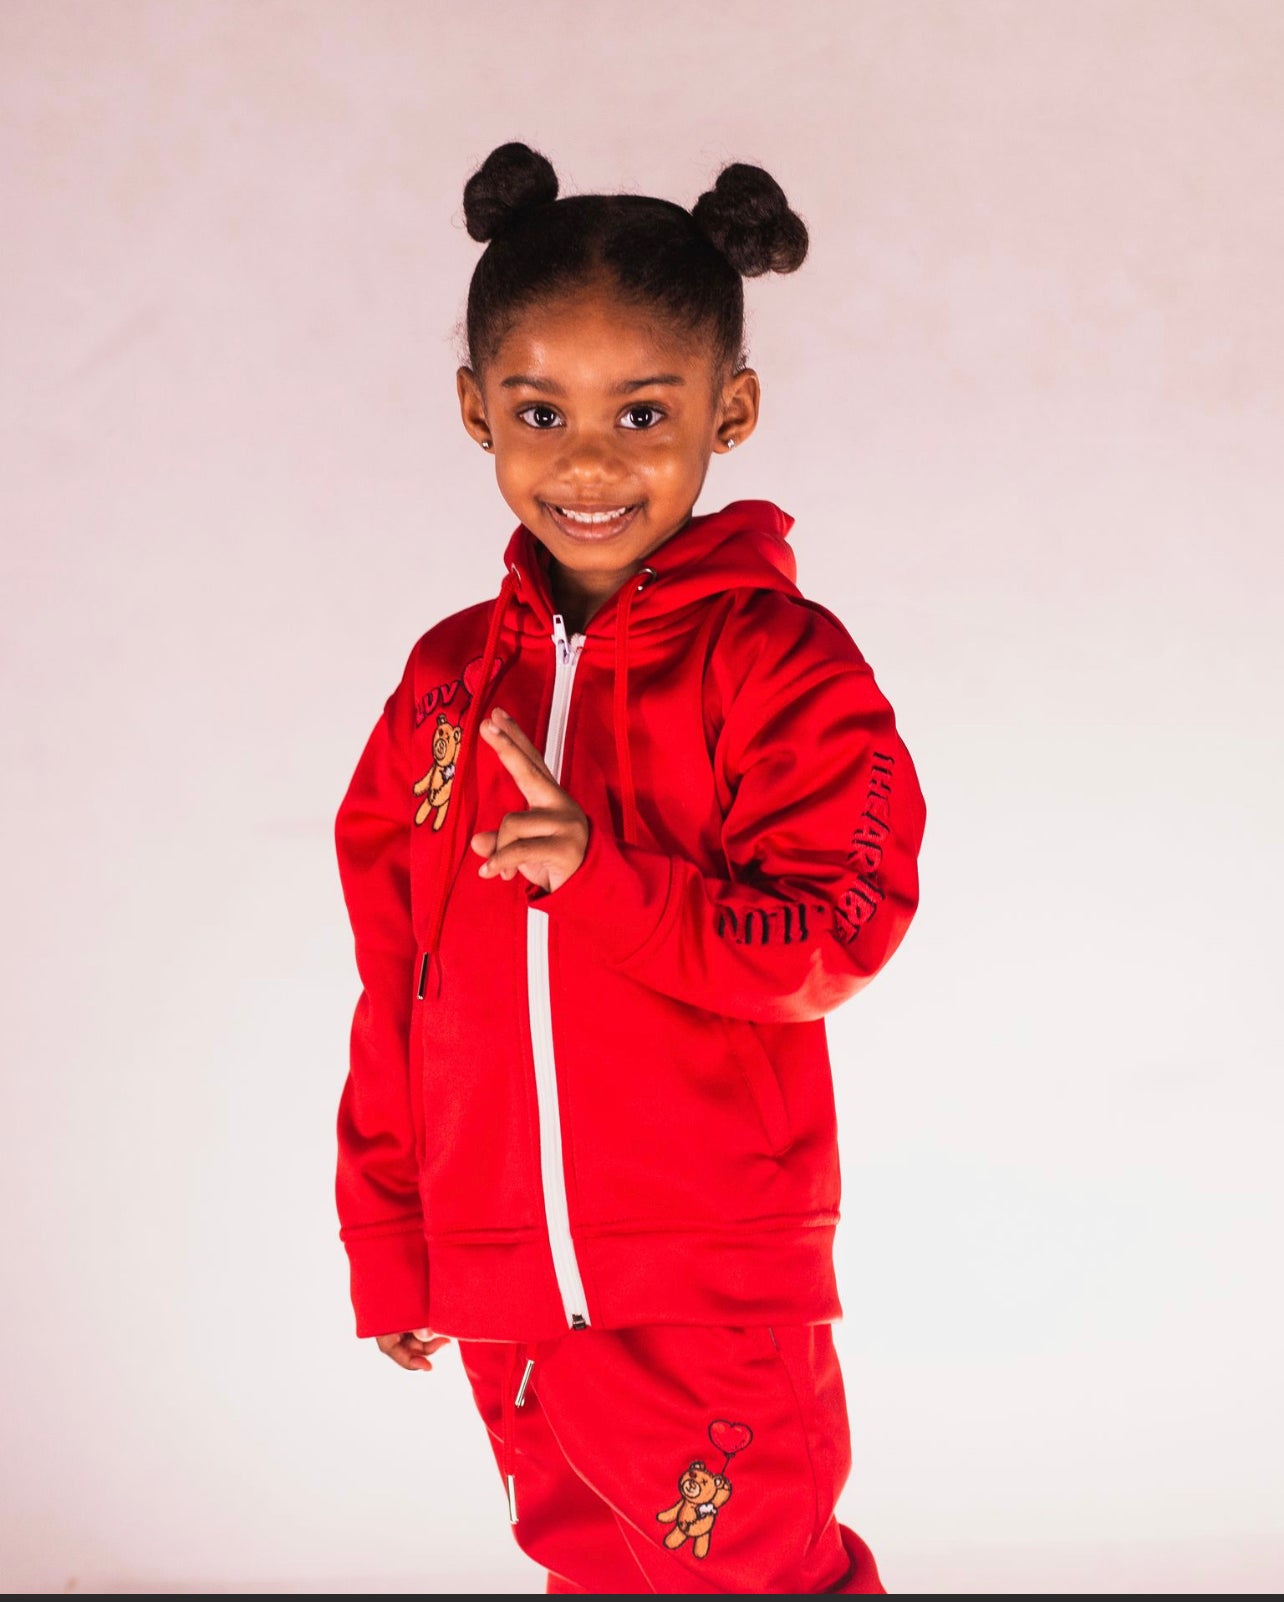 1Luv “Red” Sweat Suit (Kids)